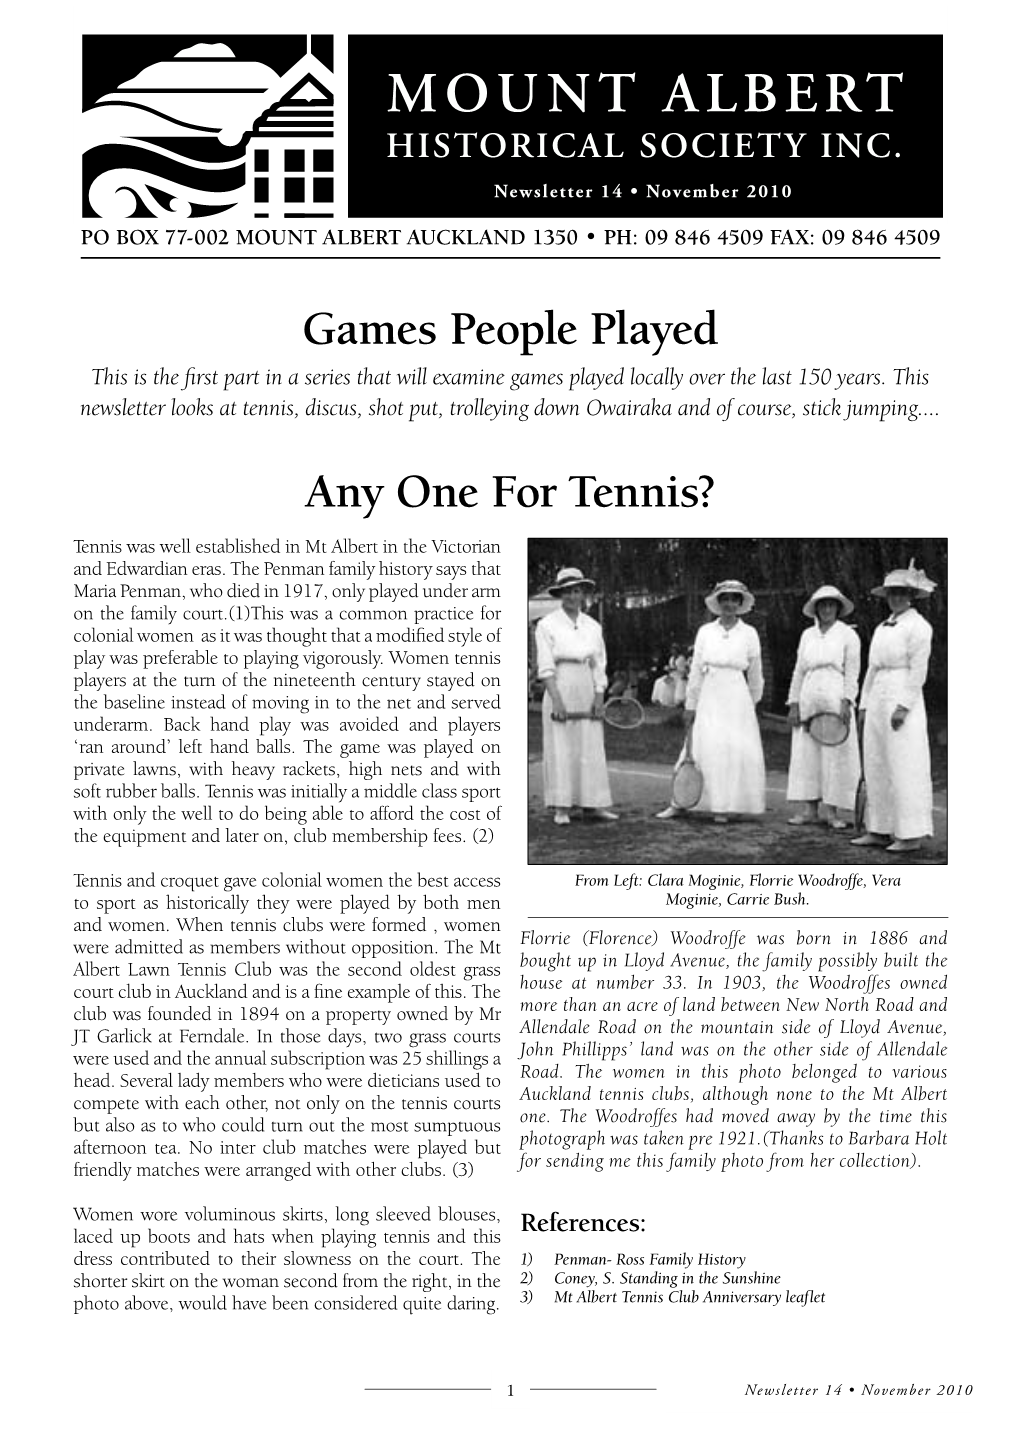 Any One for Tennis? Games People Played